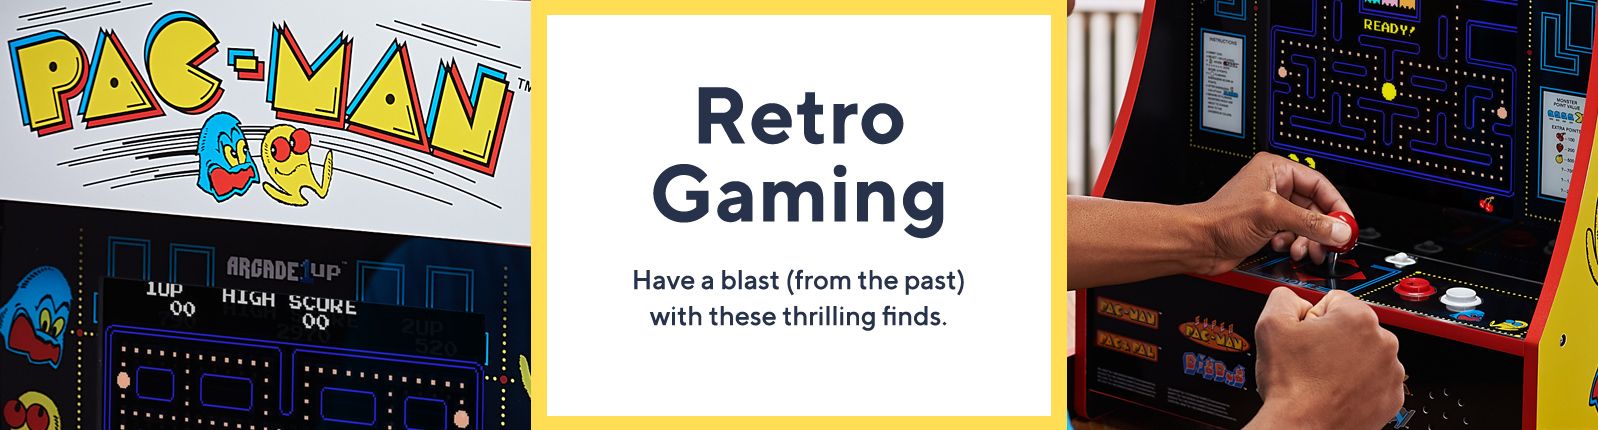 Retro Gaming: Have a blast (from the past) with these thrilling finds.